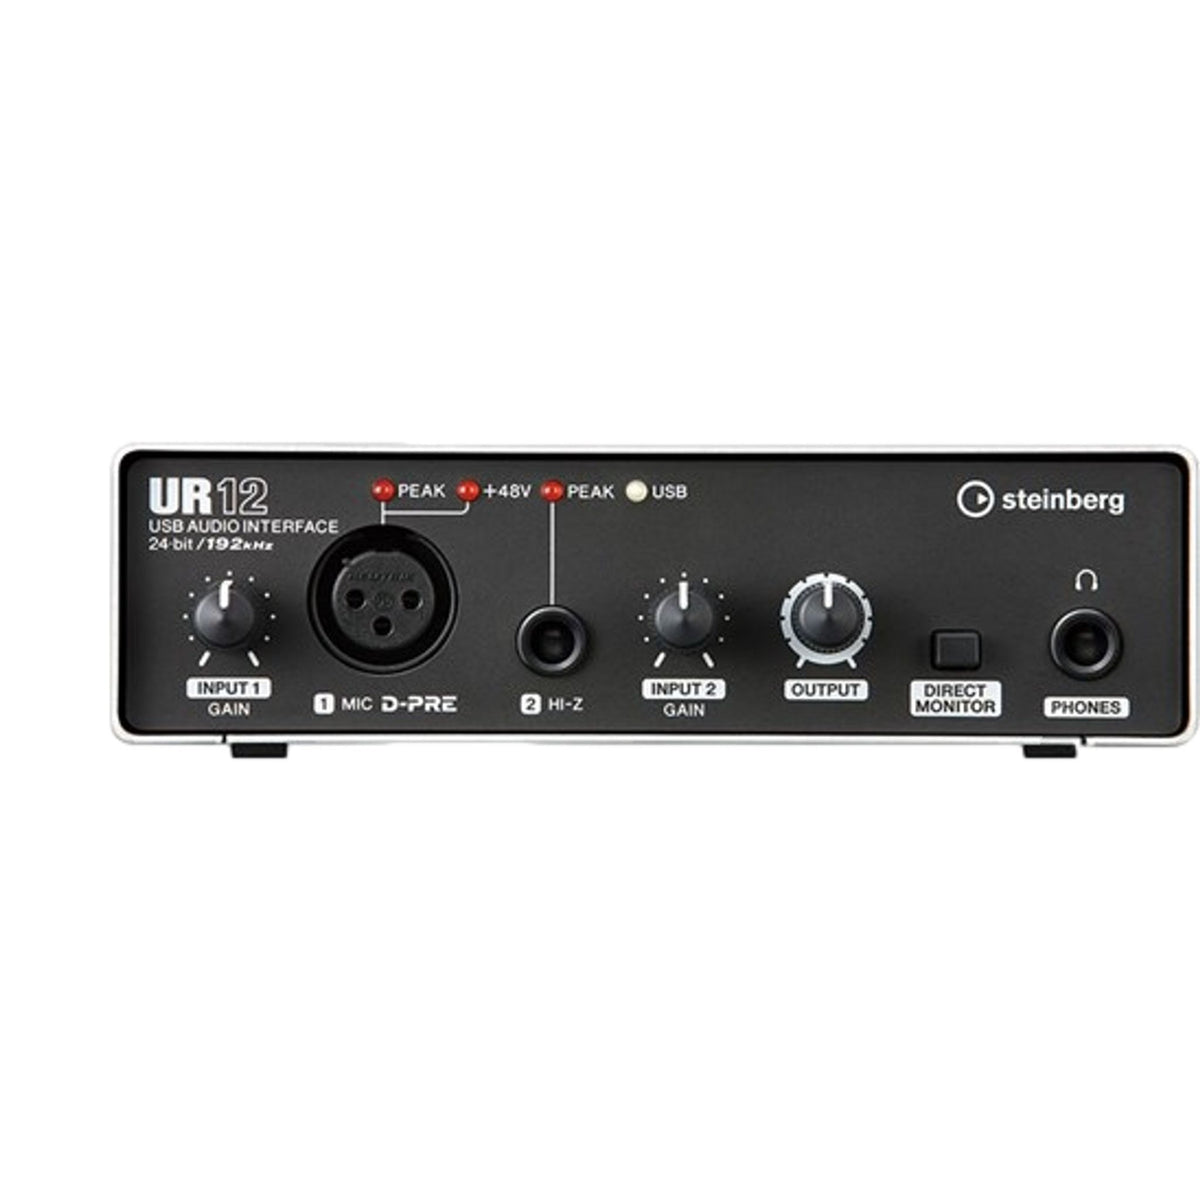 The Steinberg UR12 is a ultra compact and portable audio interface that is designed to give you an amazing sound audio virtually anywhere. Featuring up to 192kHz sample rate and is iPad compatible for musicians and producers on the go.